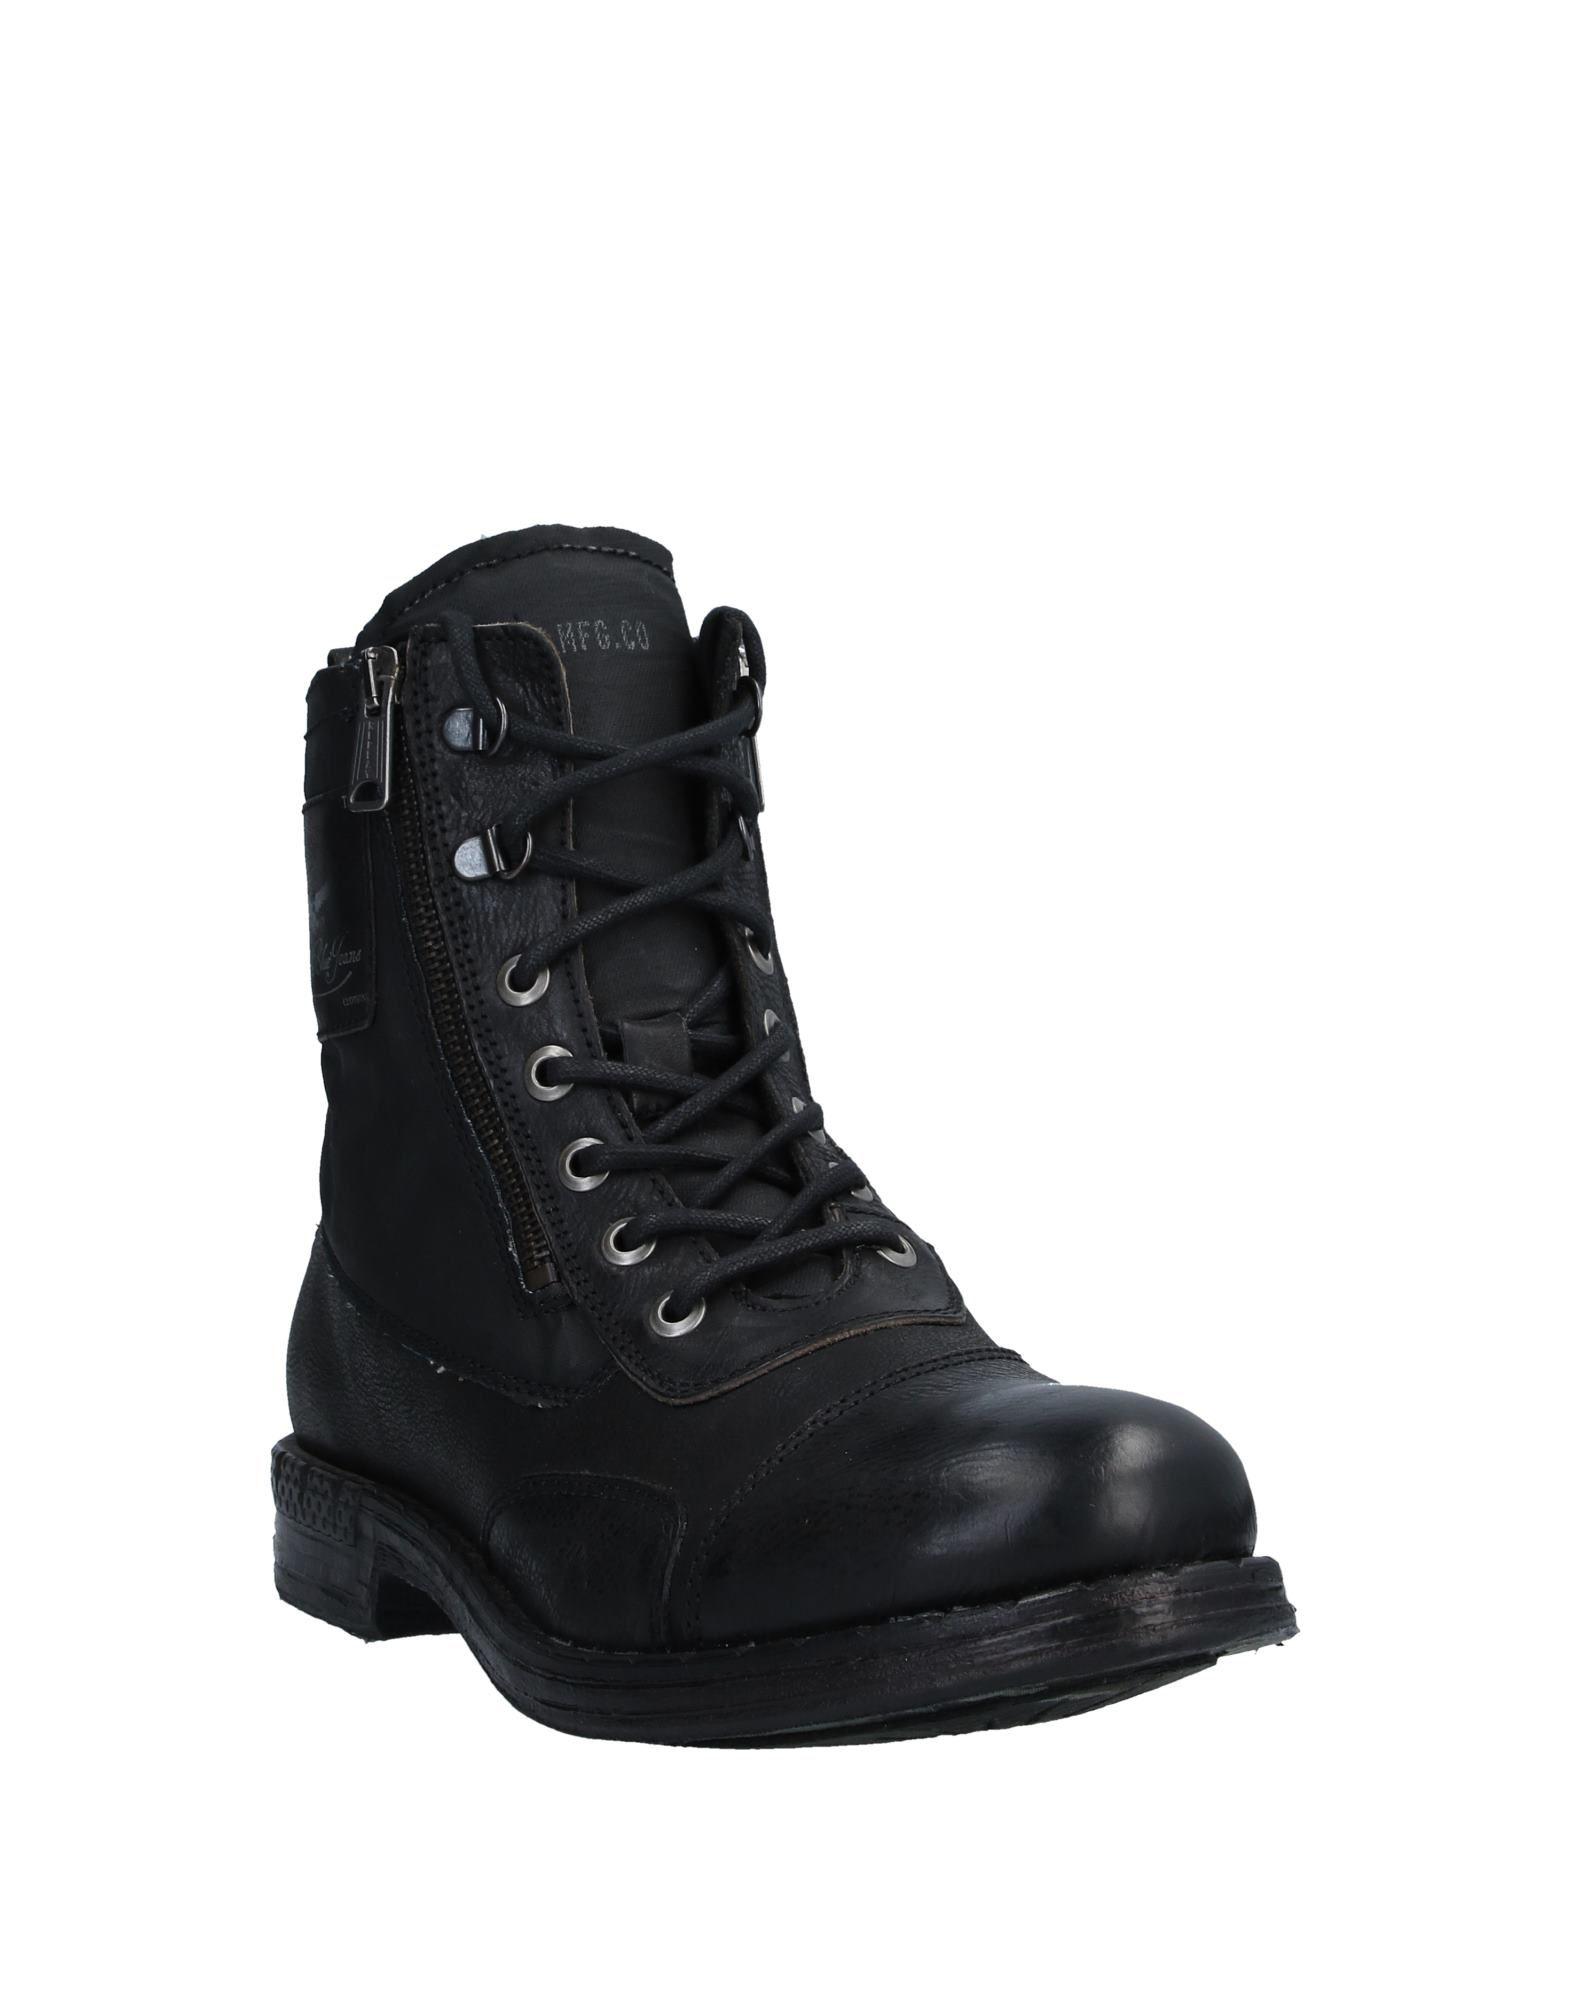 Replay Leather Ankle Boots in Black for Men - Lyst